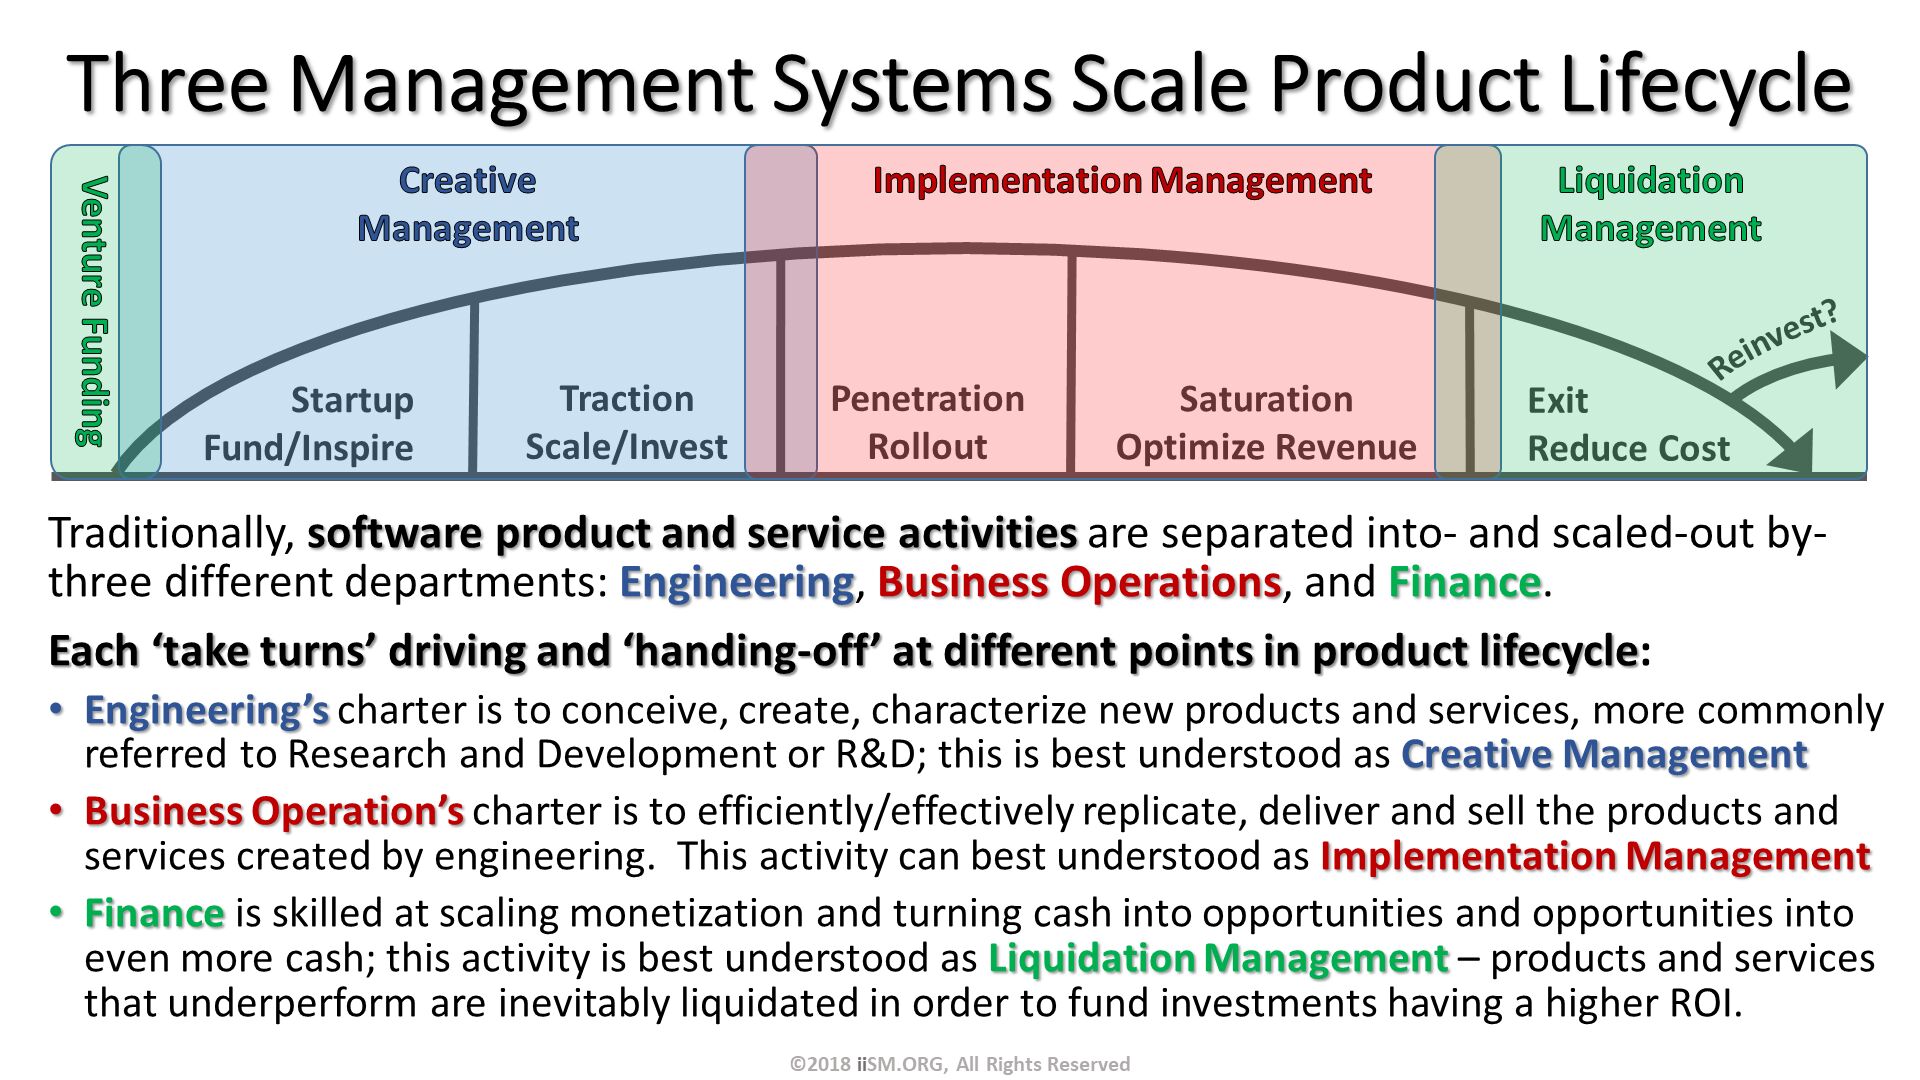 Three Management Systems Scale Product Lifecycle. Traditionally, software product and service activities are separated into- and scaled-out by- three different departments: Engineering, Business Operations, and Finance.  
Each ‘take turns’ driving and ‘handing-off’ at different points in product lifecycle:
Engineering’s charter is to conceive, create, characterize new products and services, more commonly referred to Research and Development or R&D; this is best understood as Creative Management
Business Operation’s charter is to efficiently/effectively replicate, deliver and sell the products and services created by engineering.  This activity can best understood as Implementation Management
Finance is skilled at scaling monetization and turning cash into opportunities and opportunities into even more cash; this activity is best understood as Liquidation Management – products and services that underperform are inevitably liquidated in order to fund investments having a higher ROI. ©2018 iiSM.ORG, All Rights Reserved. 